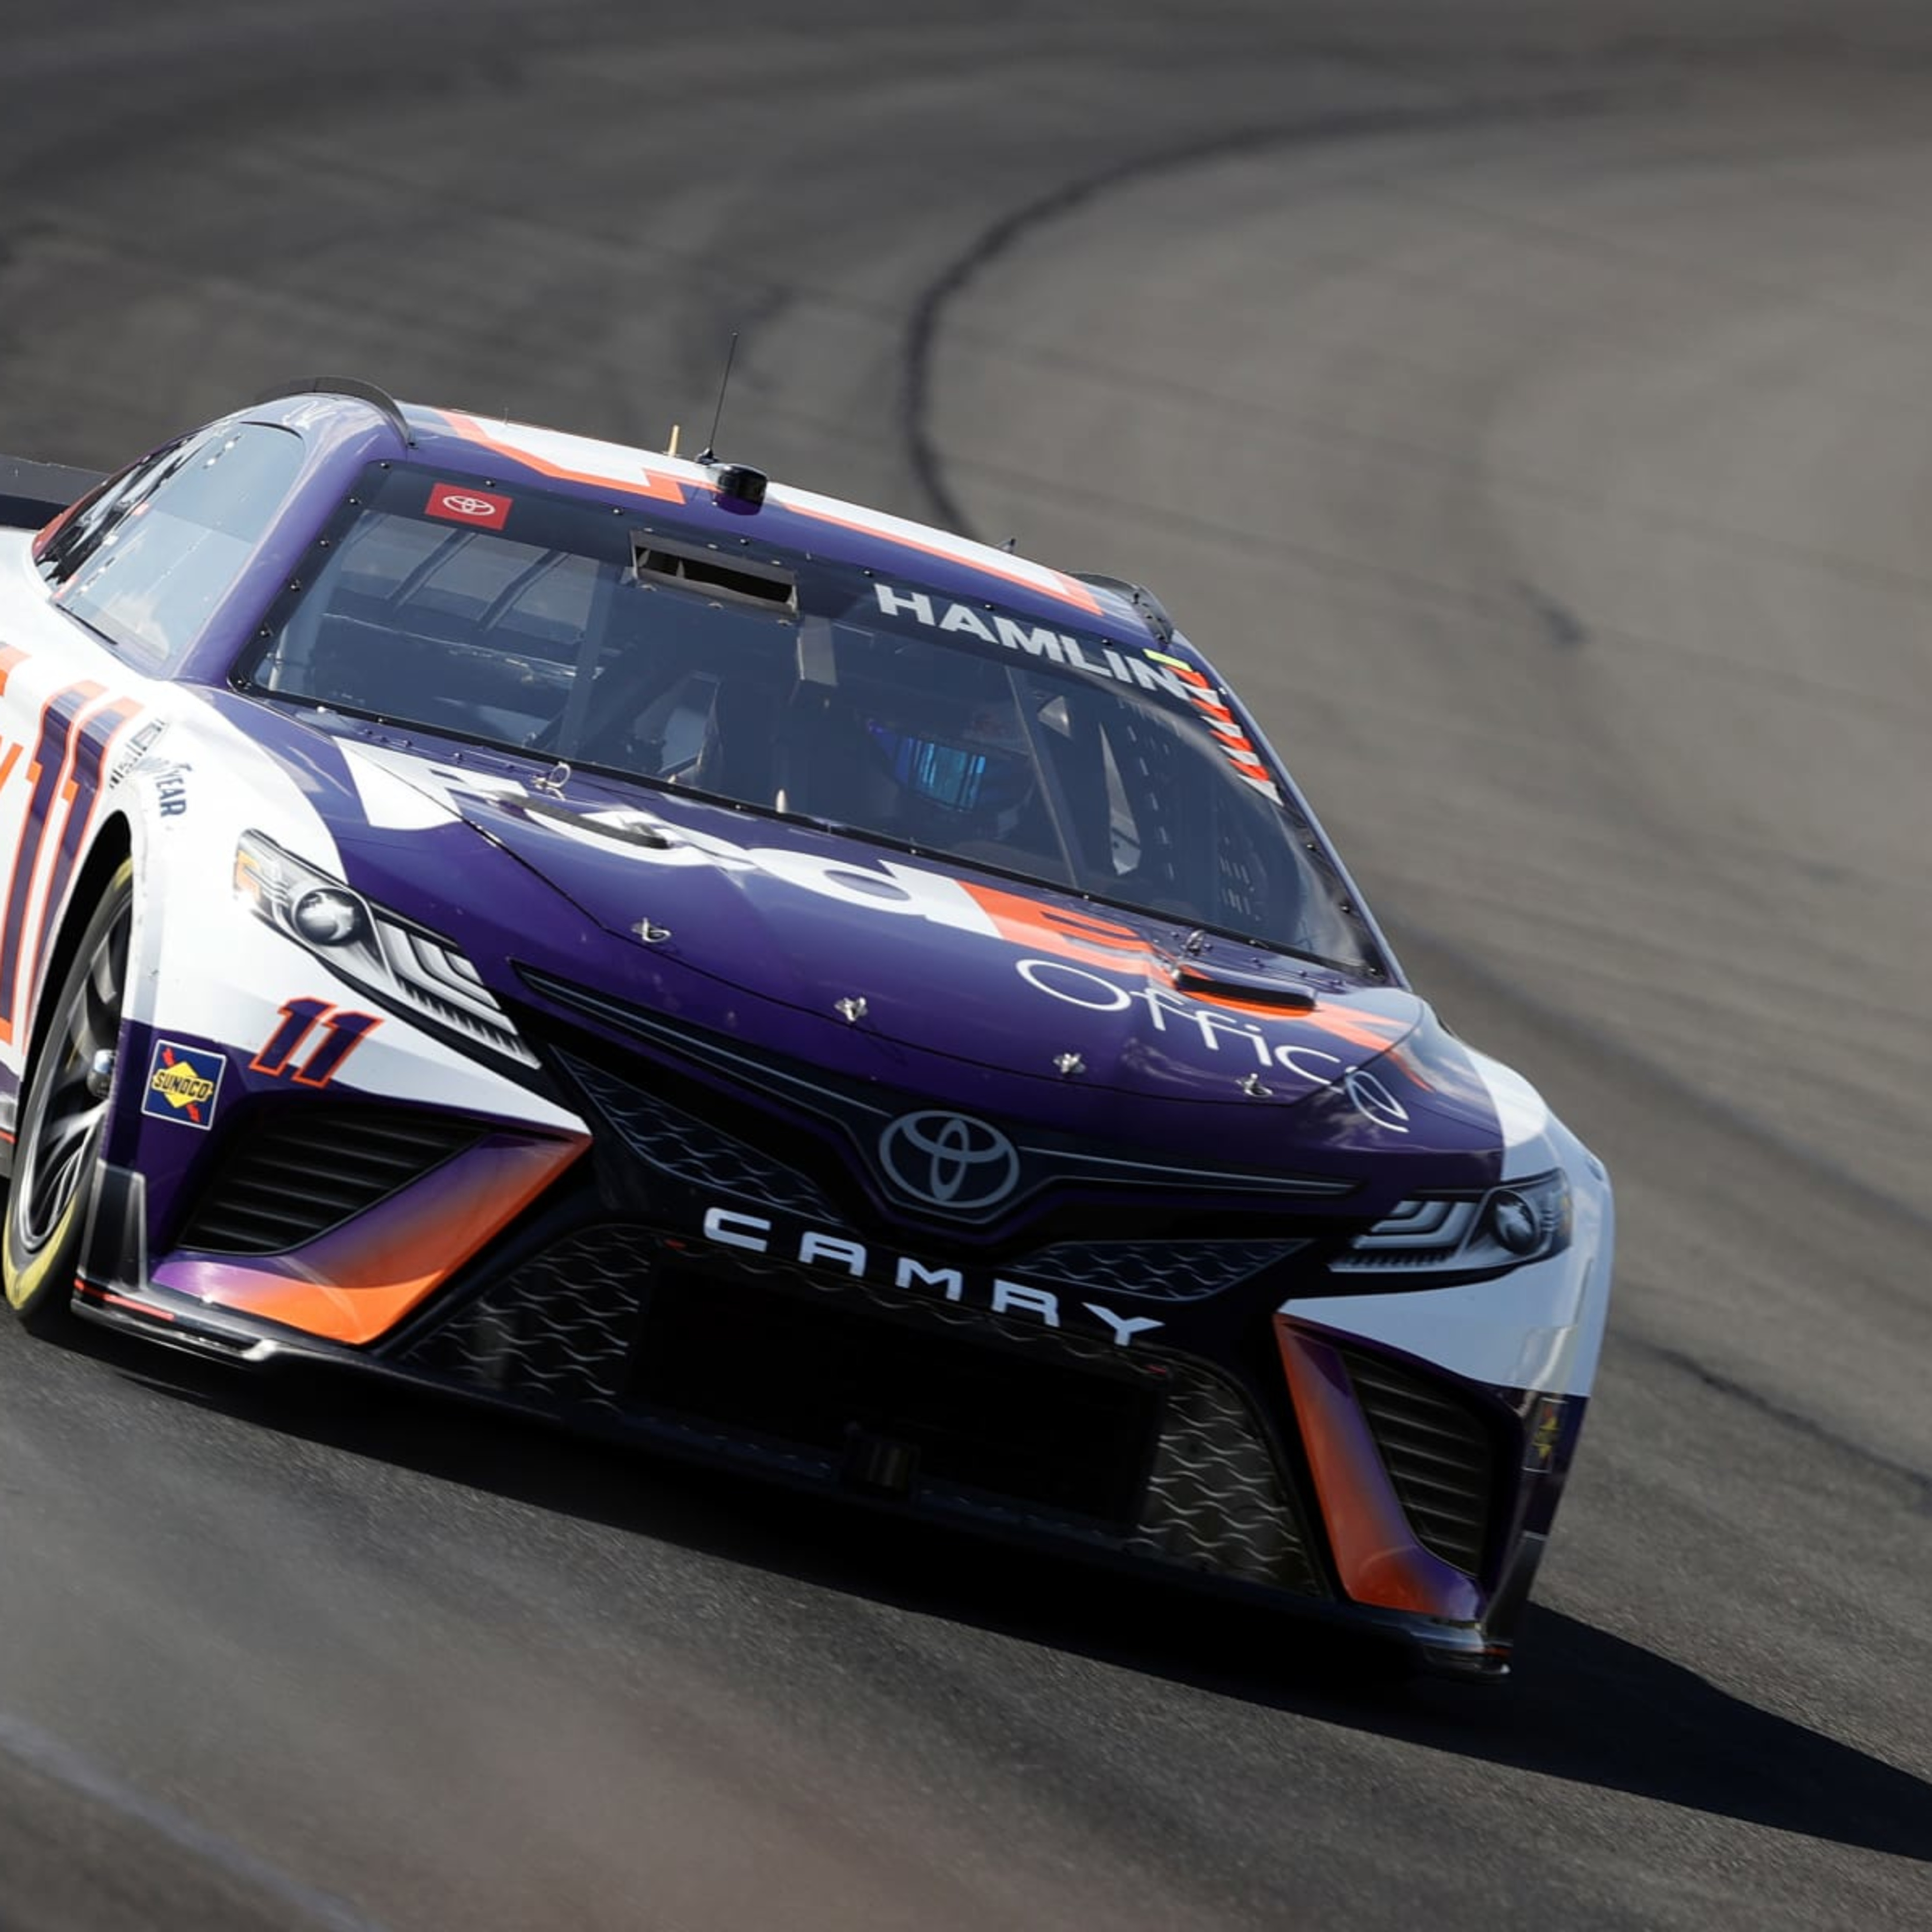 NASCAR at Pocono 2022 Results: Denny Hamlin Holds Off Kyle Busch for 3rd Win of Year